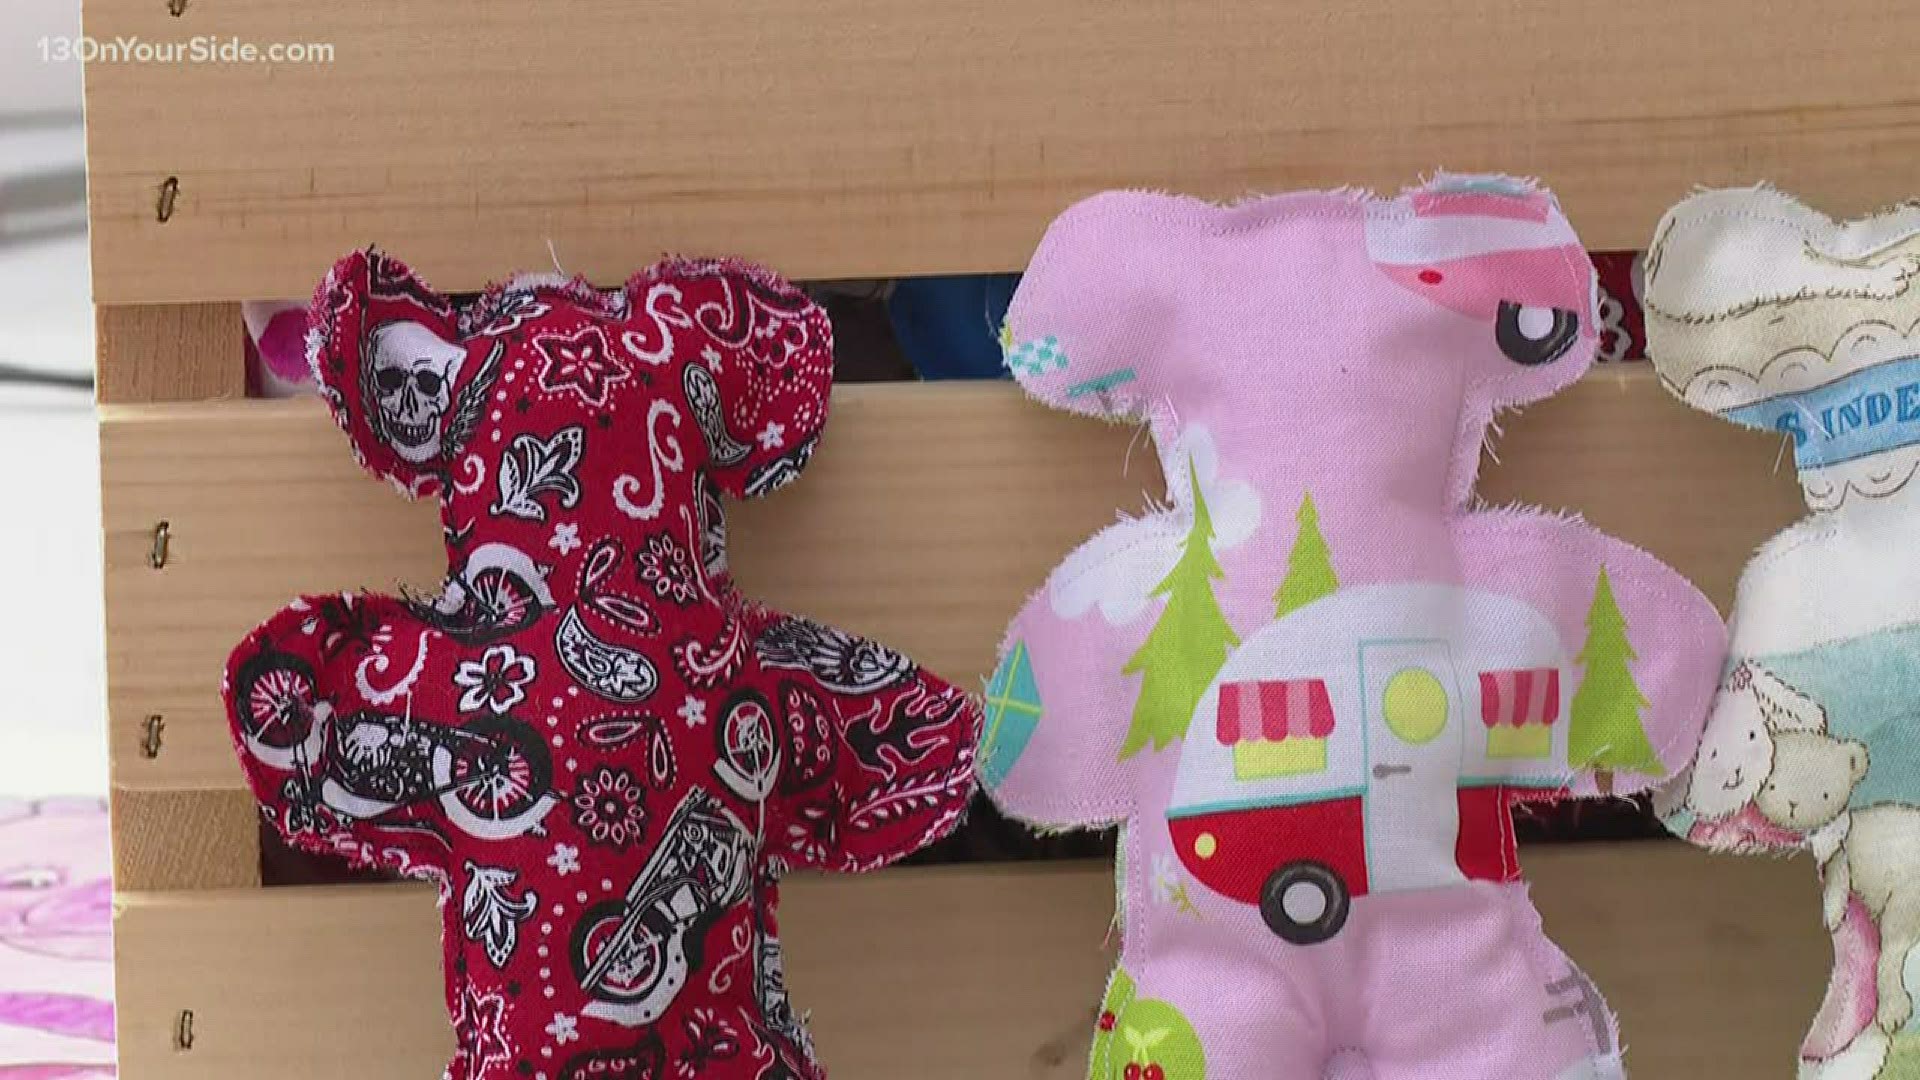 Linda Schotts and her granddaughter, Sage, weren't sure how they'd spend their quarantine. They've decided to sew and donate 'Prayer Bears' to area nursing homes.